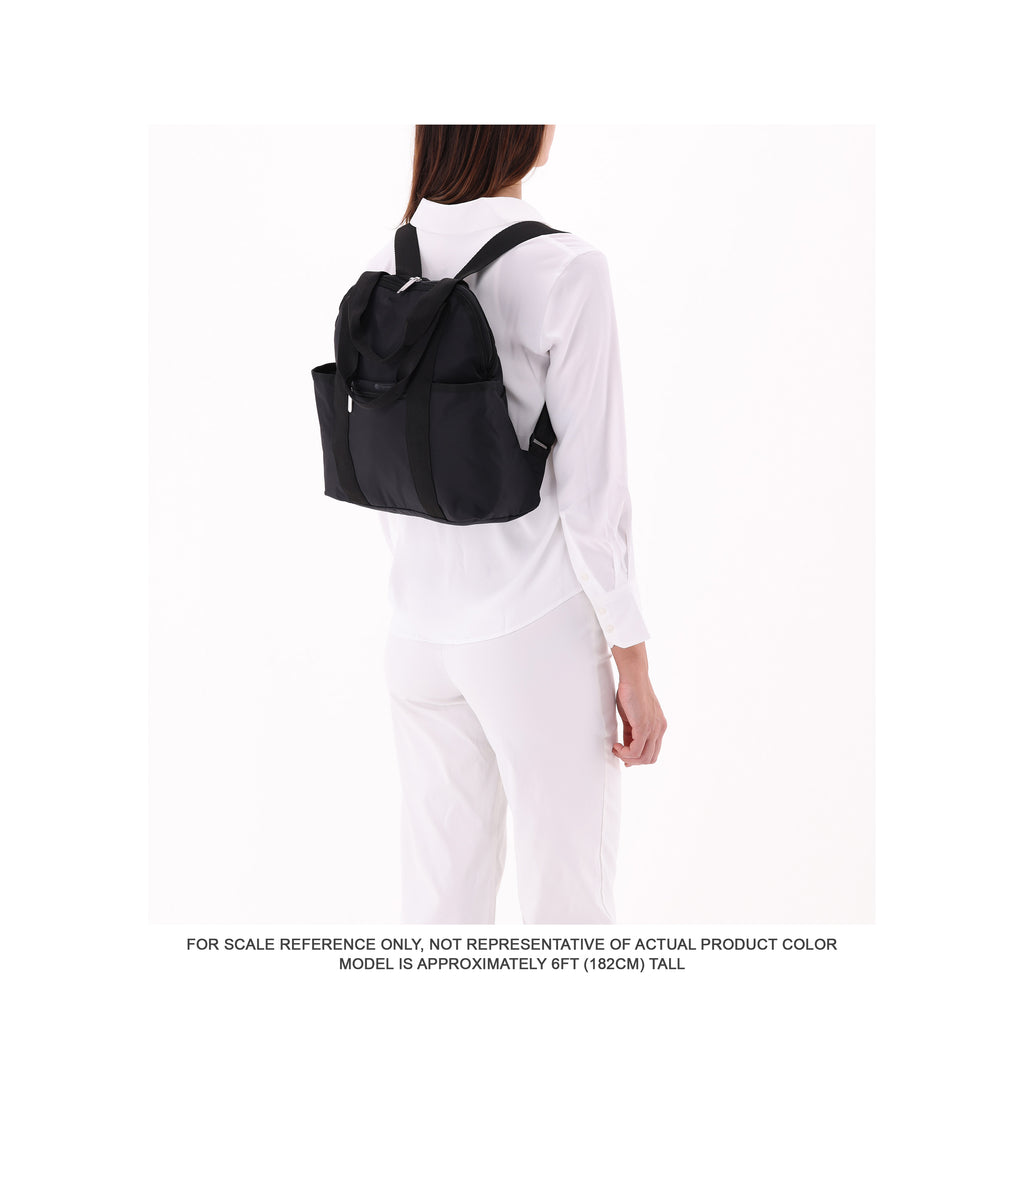 Double Trouble Backpack - 23452082896944